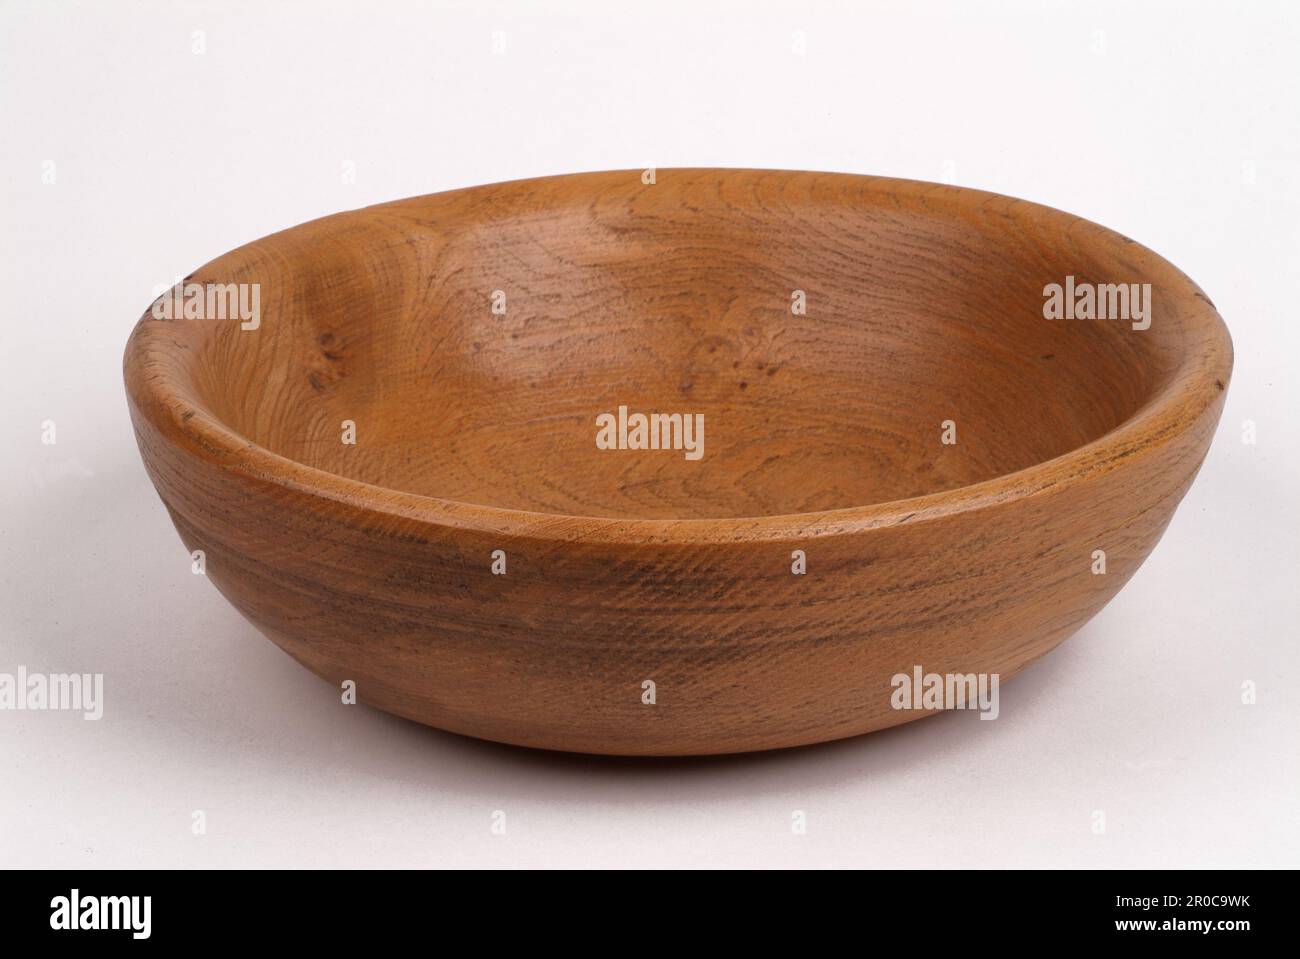 Elm Bowl, 1954. Made by George Lailey of Bucklebury Common, Berkshire.. Pinto Collection - Purchased from Edward H Pinto, 1965.. This elm wood bowl was made by George Lailey of Bucklebury Common, Berkshire in 1954. George Lailey was one of the last pole lathe workers to earn a living from making domestic utensils in England. This bowl was one of his last pieces which he made in 1954 when he was 85 years old. Although woods such as sycamore and beech were popular amongst wood turners, George Lailey preferred to use elm, which was in plentiful supply at that time. The outbreak of Dutch elm disea Stock Photo